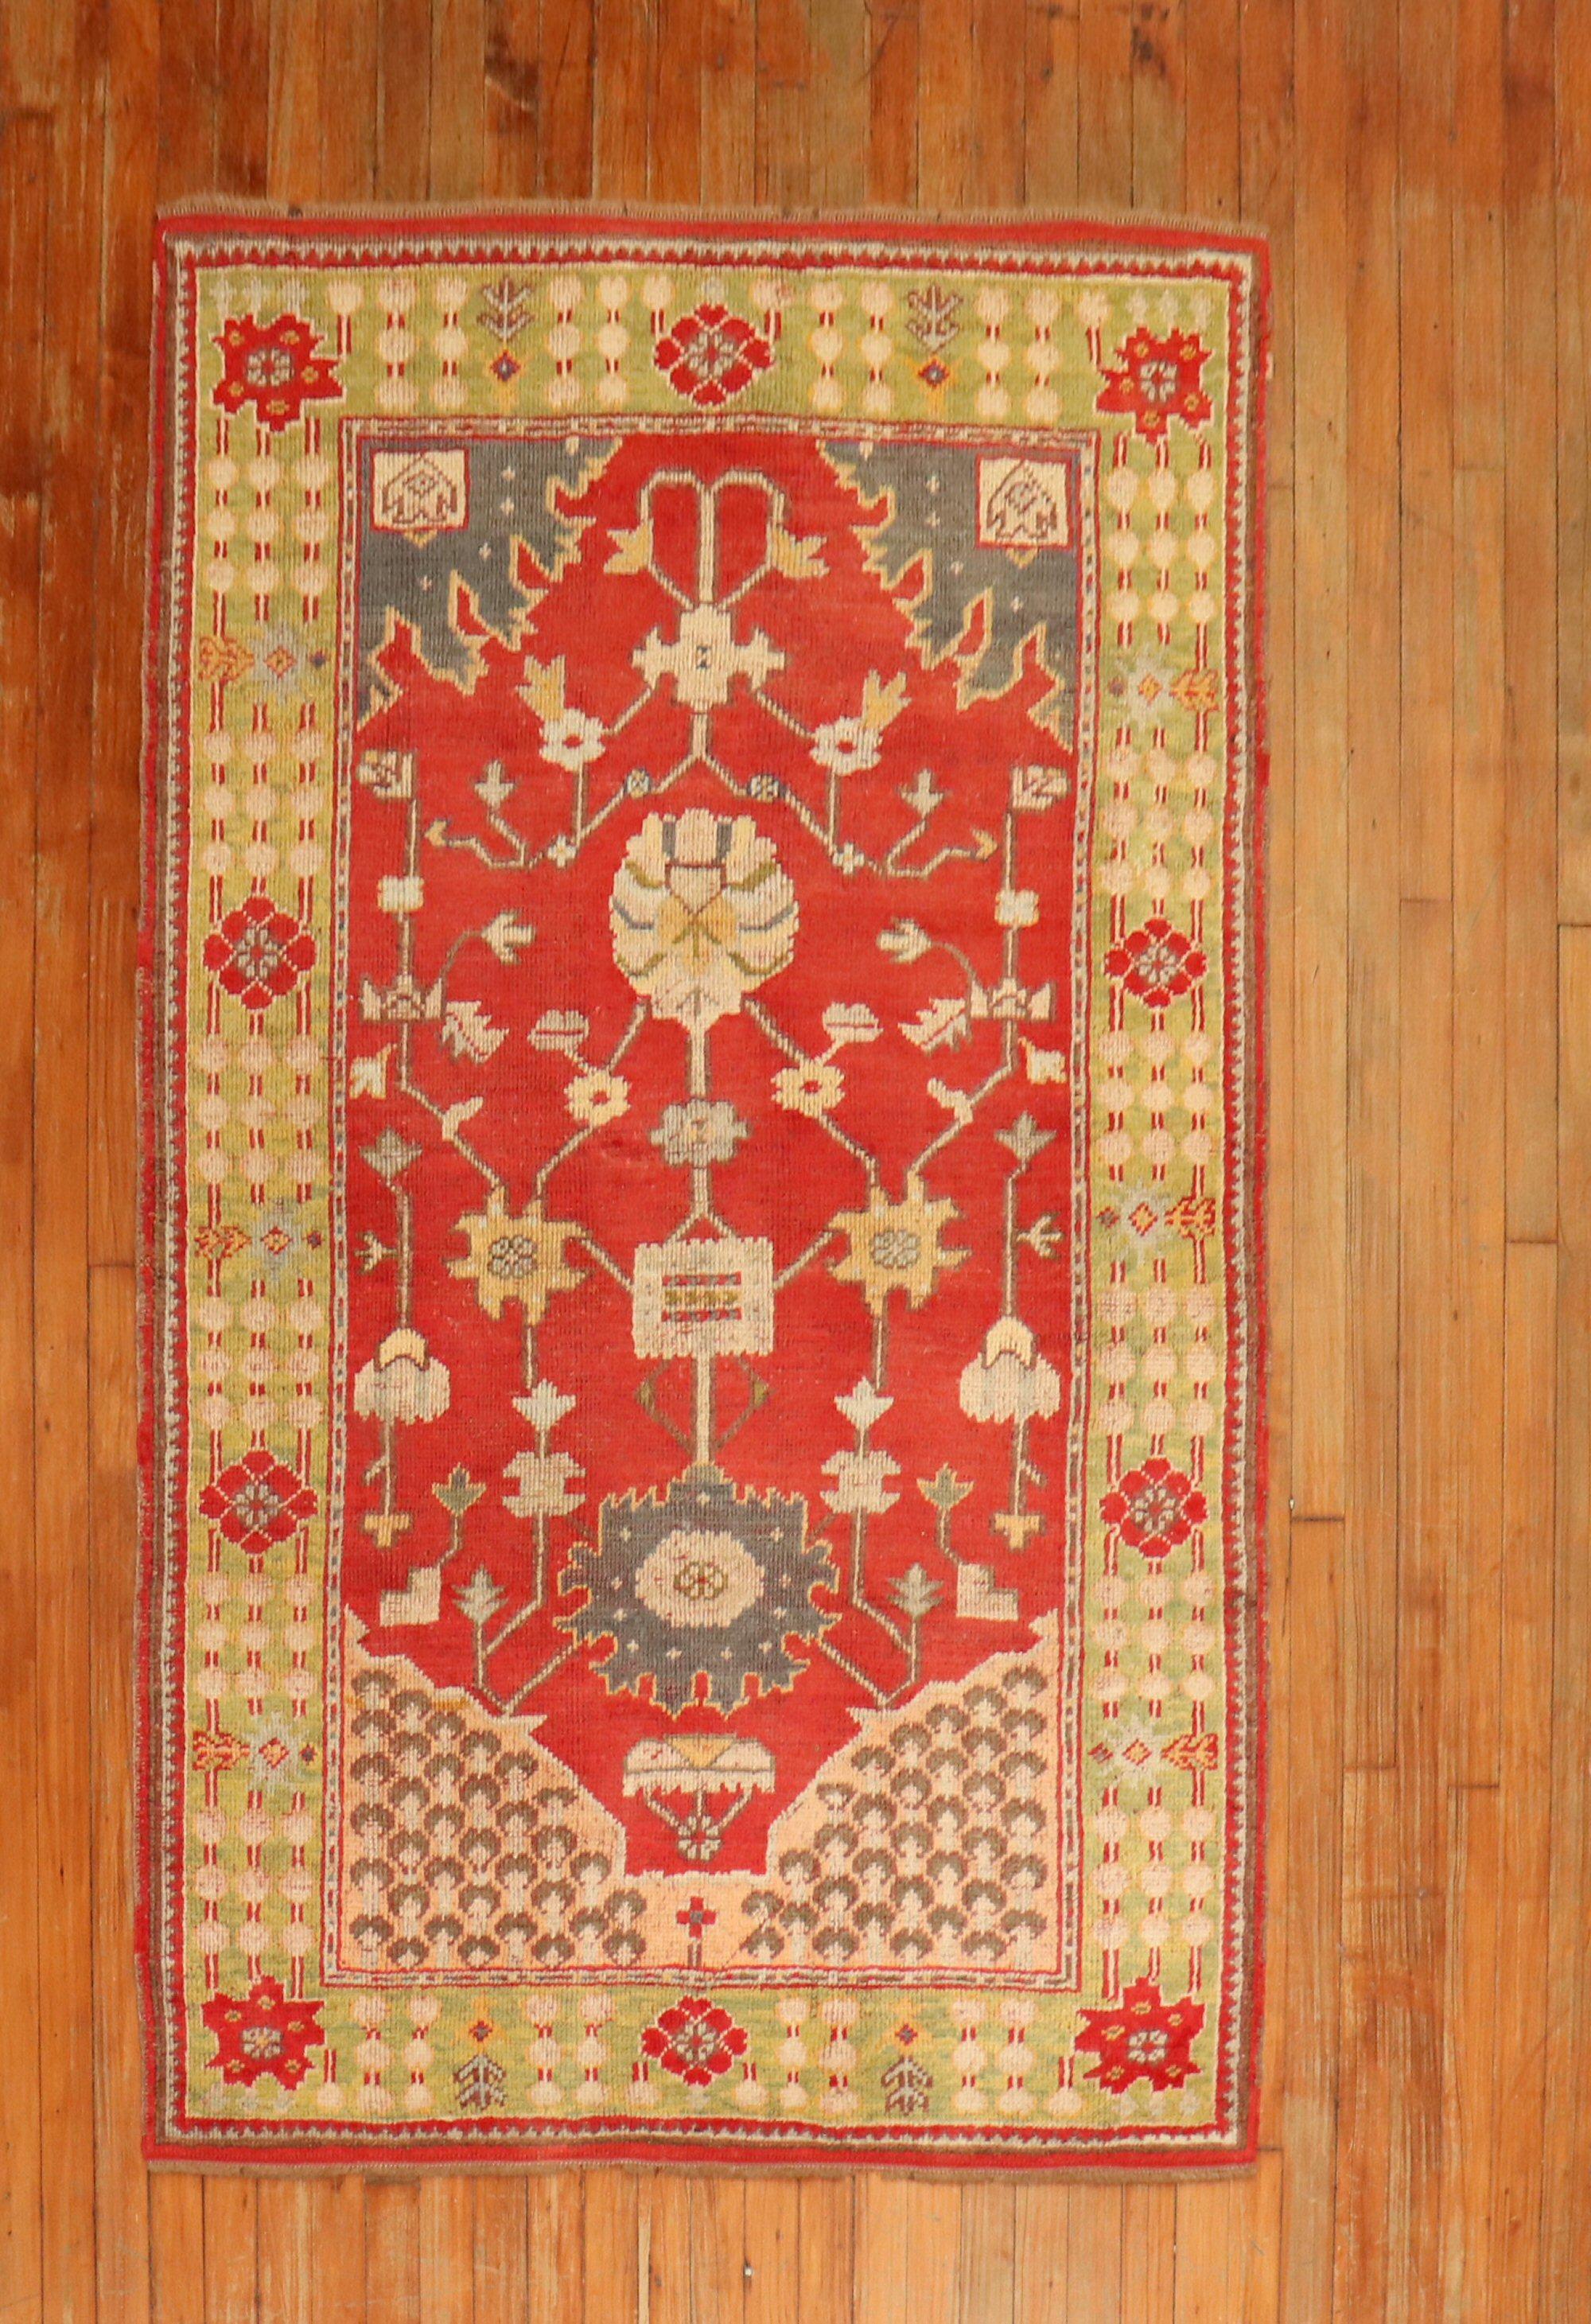 Charming early 20th century colorful turkish oushak rug with a bright red field , lime green border.

Measures: 3'11